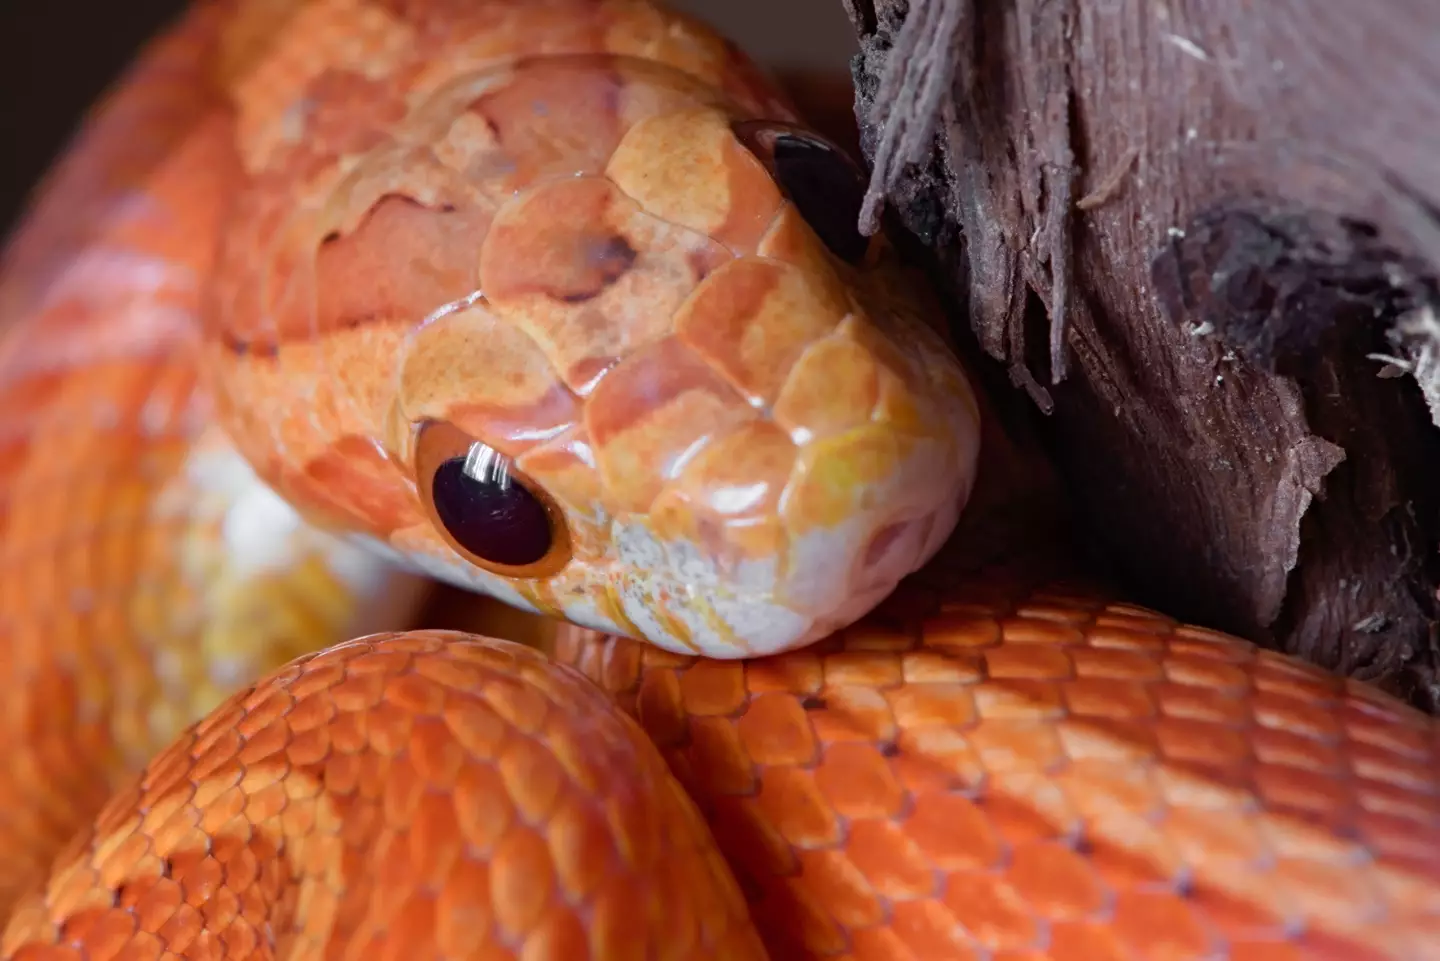 The reptile was identified as a three-foot long corn snake.